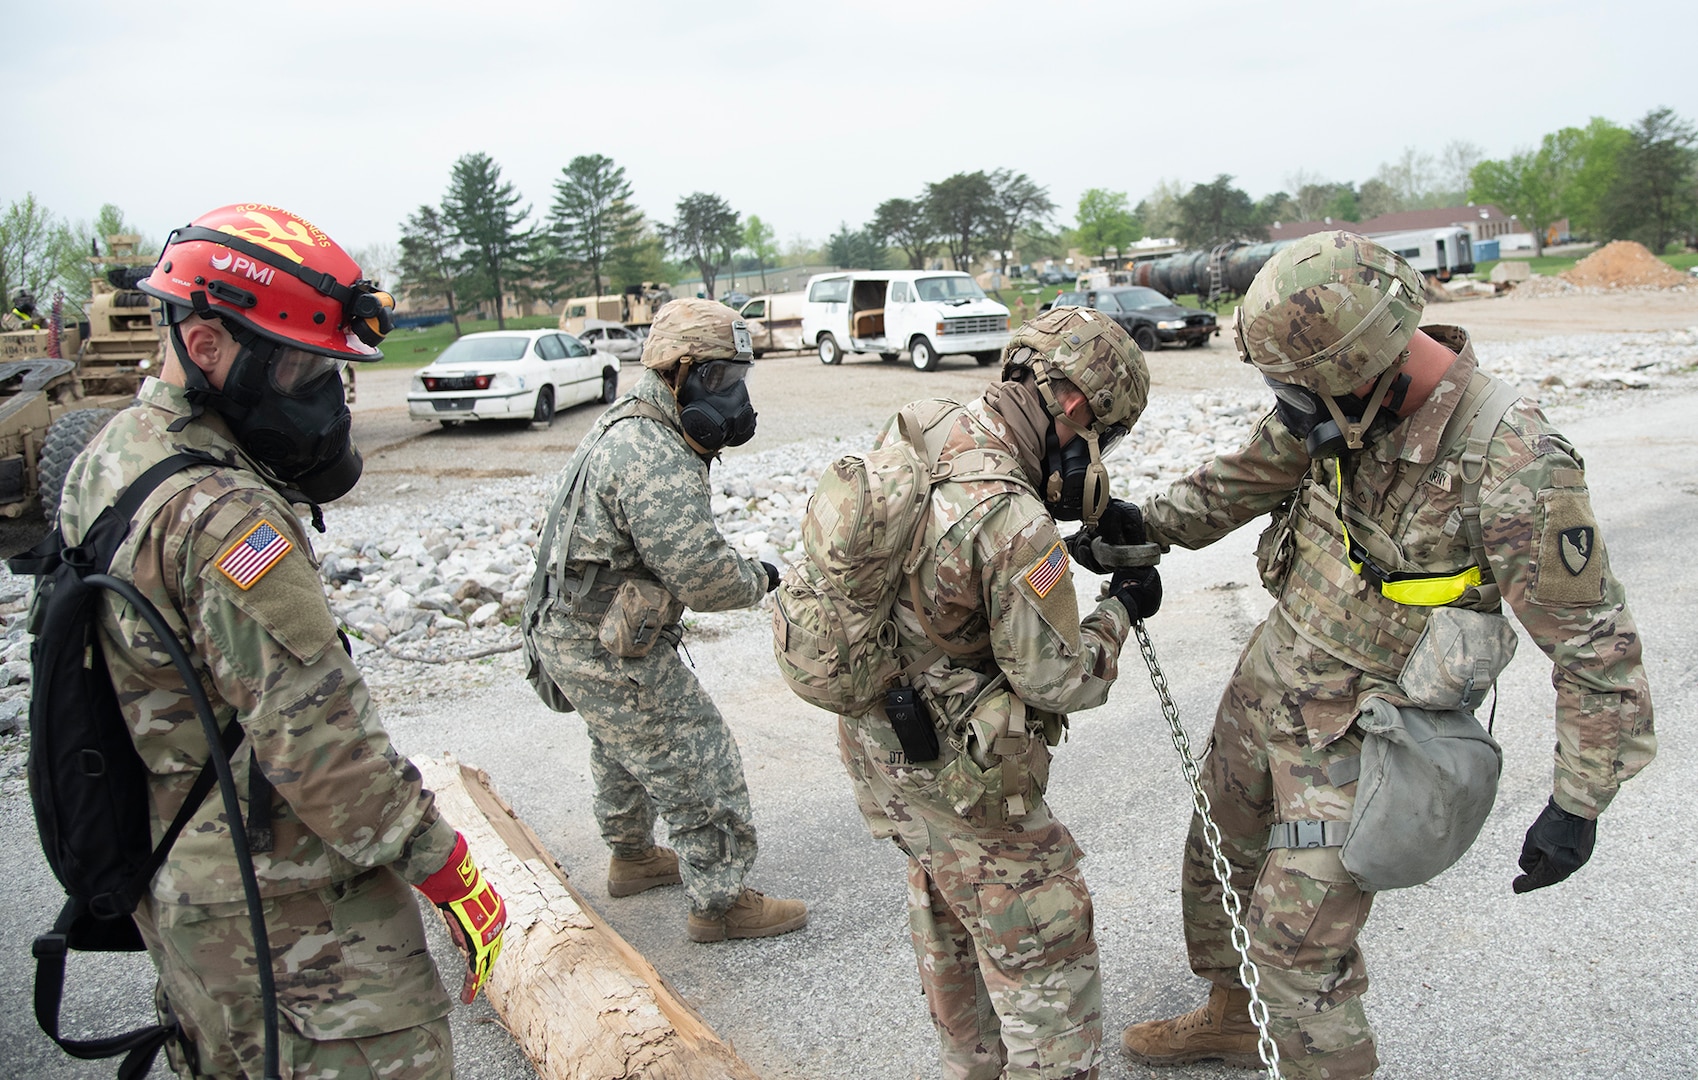 U.S. Soldiers with the 62nd Engineers, 104th Engineer Construction Company, from Ft. Hood, Texas, use Heavy Expanded Mobility Tactical Trucks (HEMTT) to pull debris (including vehicles and downed utility poles) from a road at Muscatatuck Urban Training Center in Butlerville, Ind., during Guardian Response 19, a homeland emergency response exercise which tests the ability of the military to respond to a man-made or natural disaster on April 30, 2019. The Soldiers are responding to a city following a mock nuclear detonation, so they must don gas masks and protective equipment while working. (U.S. Army photo by Master Sgt. Brad Staggs/released)